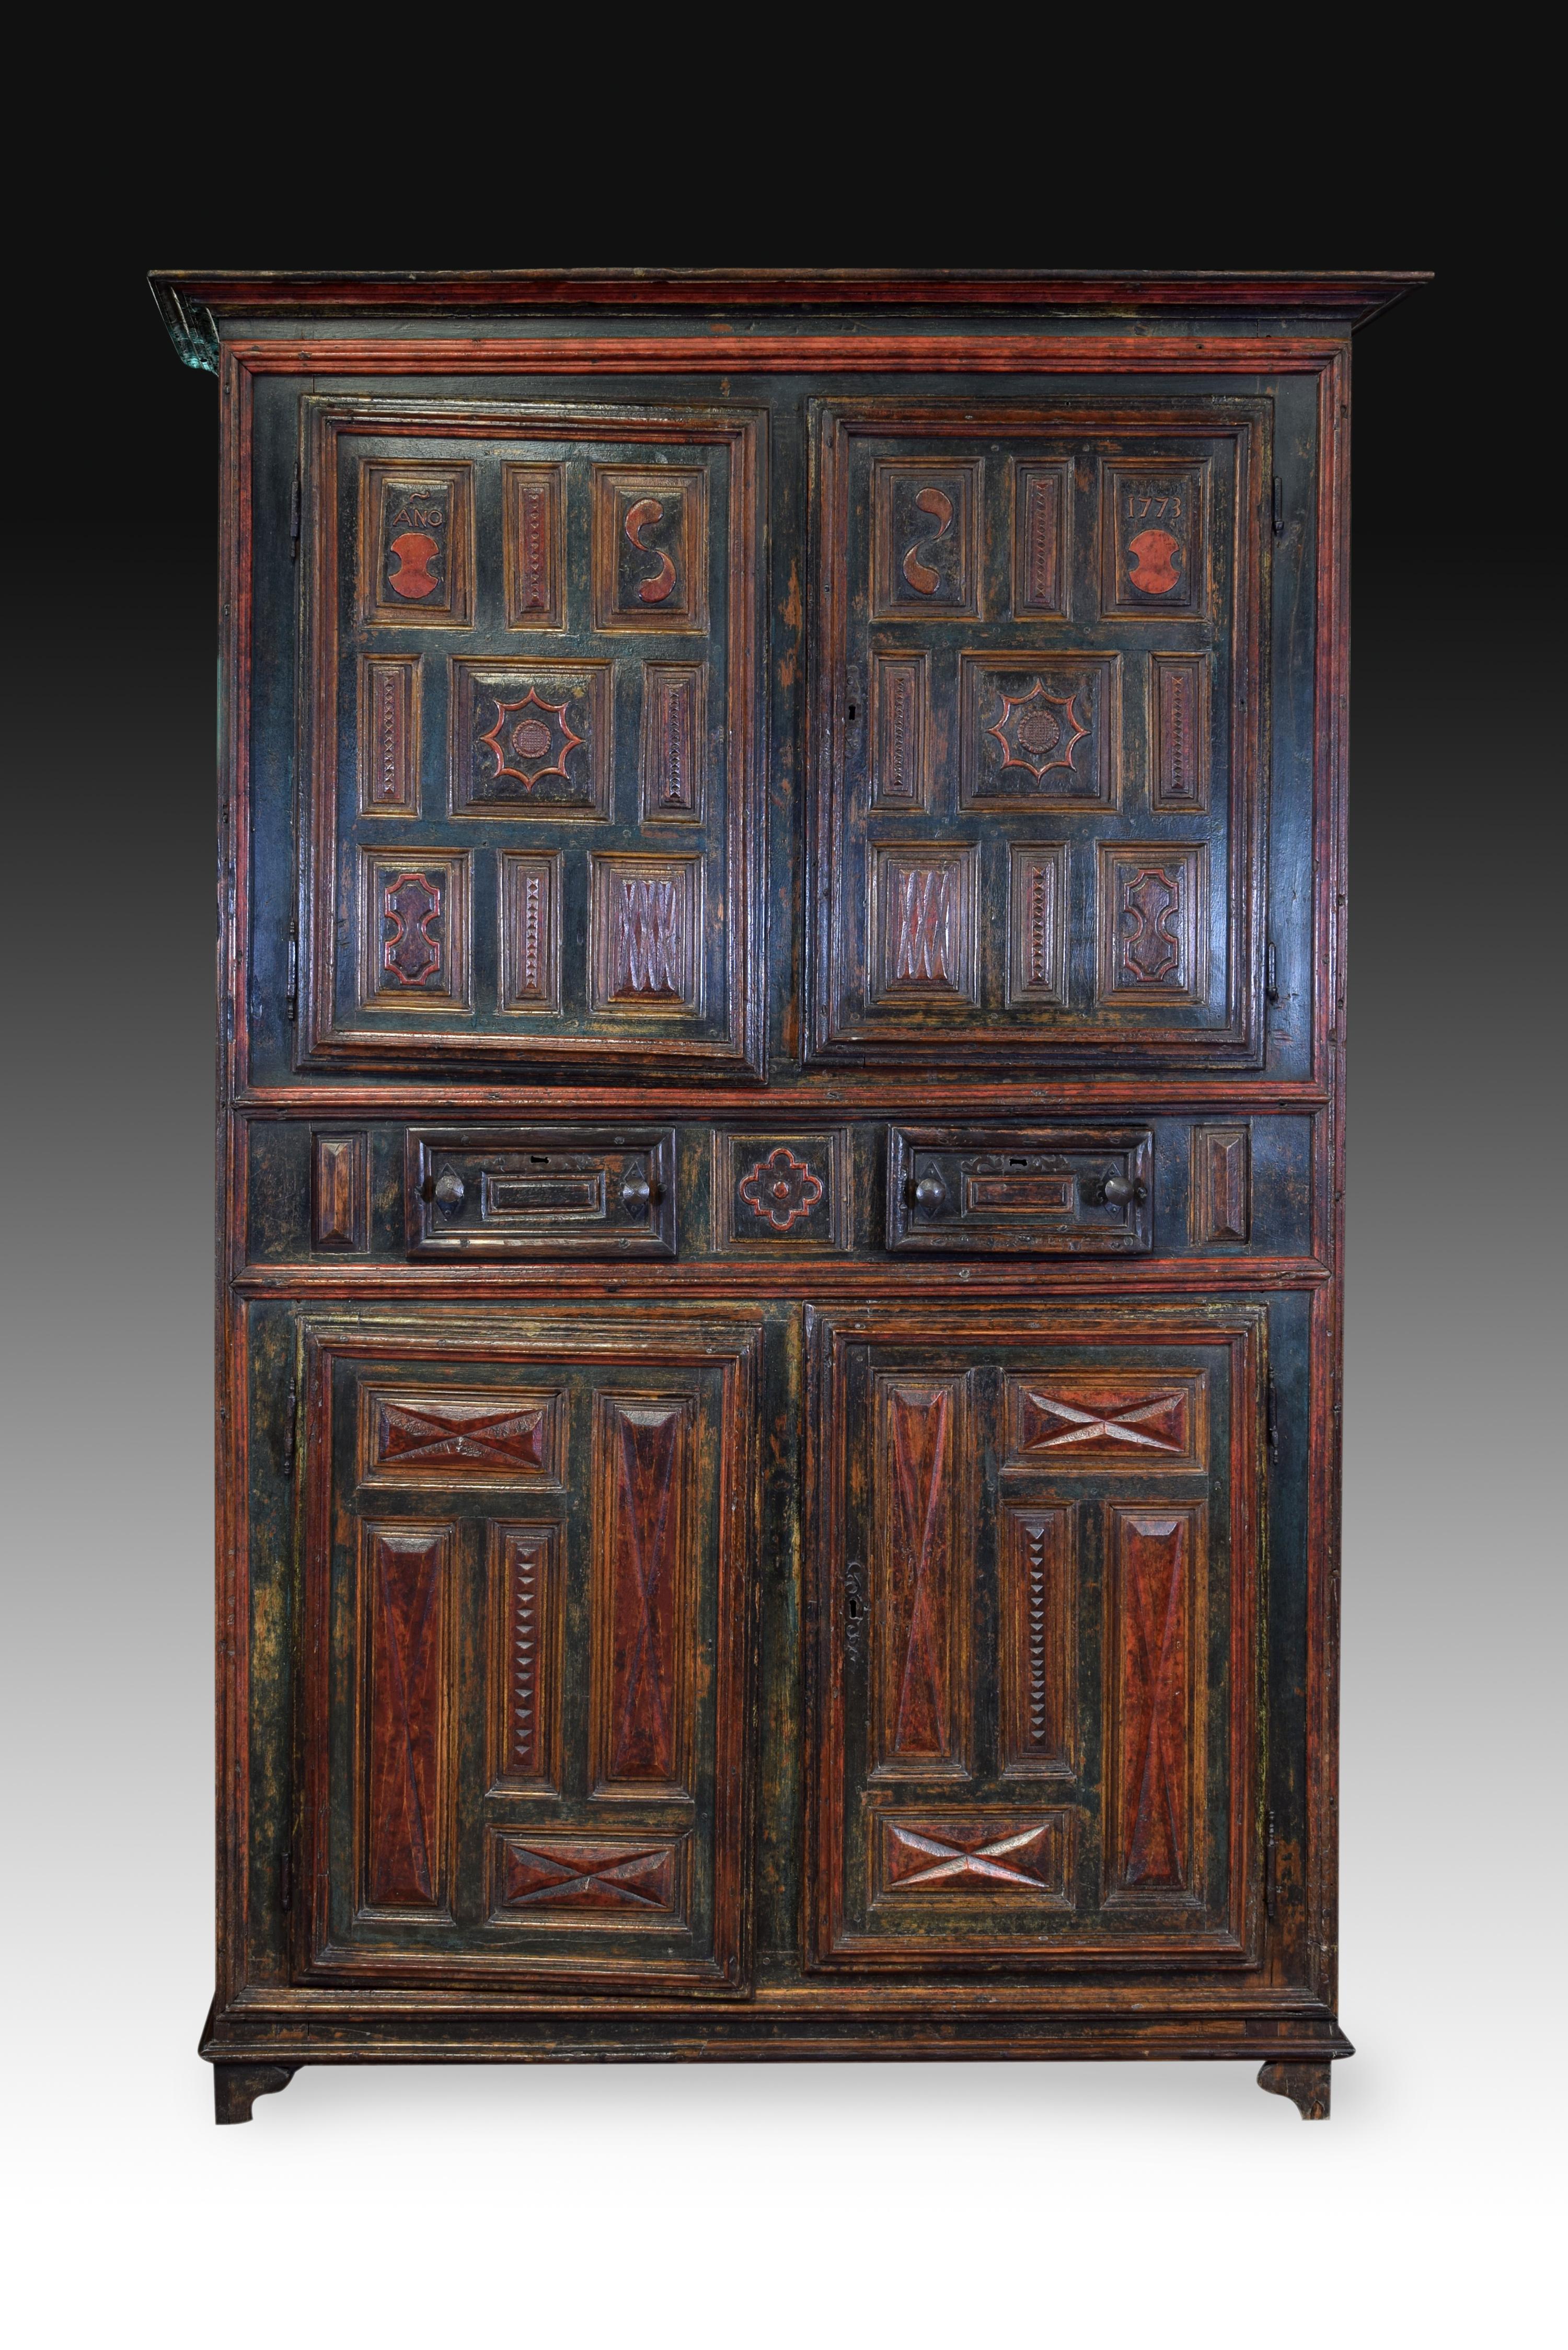 Polychrome closet. Carved wood, polychrome, iron. 18th century (1773). 
High cabinet with four doors and two drawers made of carved and polychrome wood decorated to the outside with a series of moldings and flat carvings organized in square and